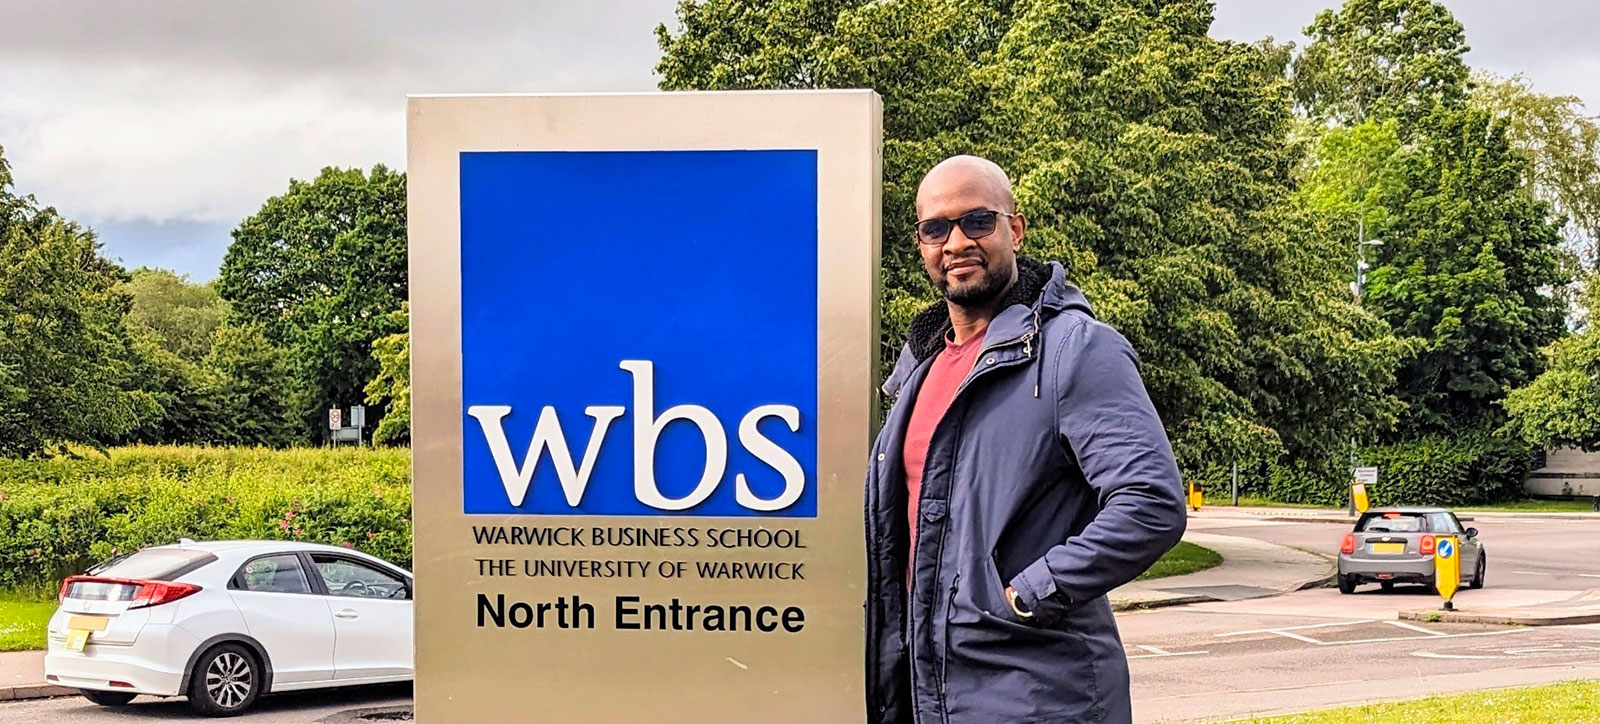 Robert Ndebele stands next to the Warwick Business School logo outside the School